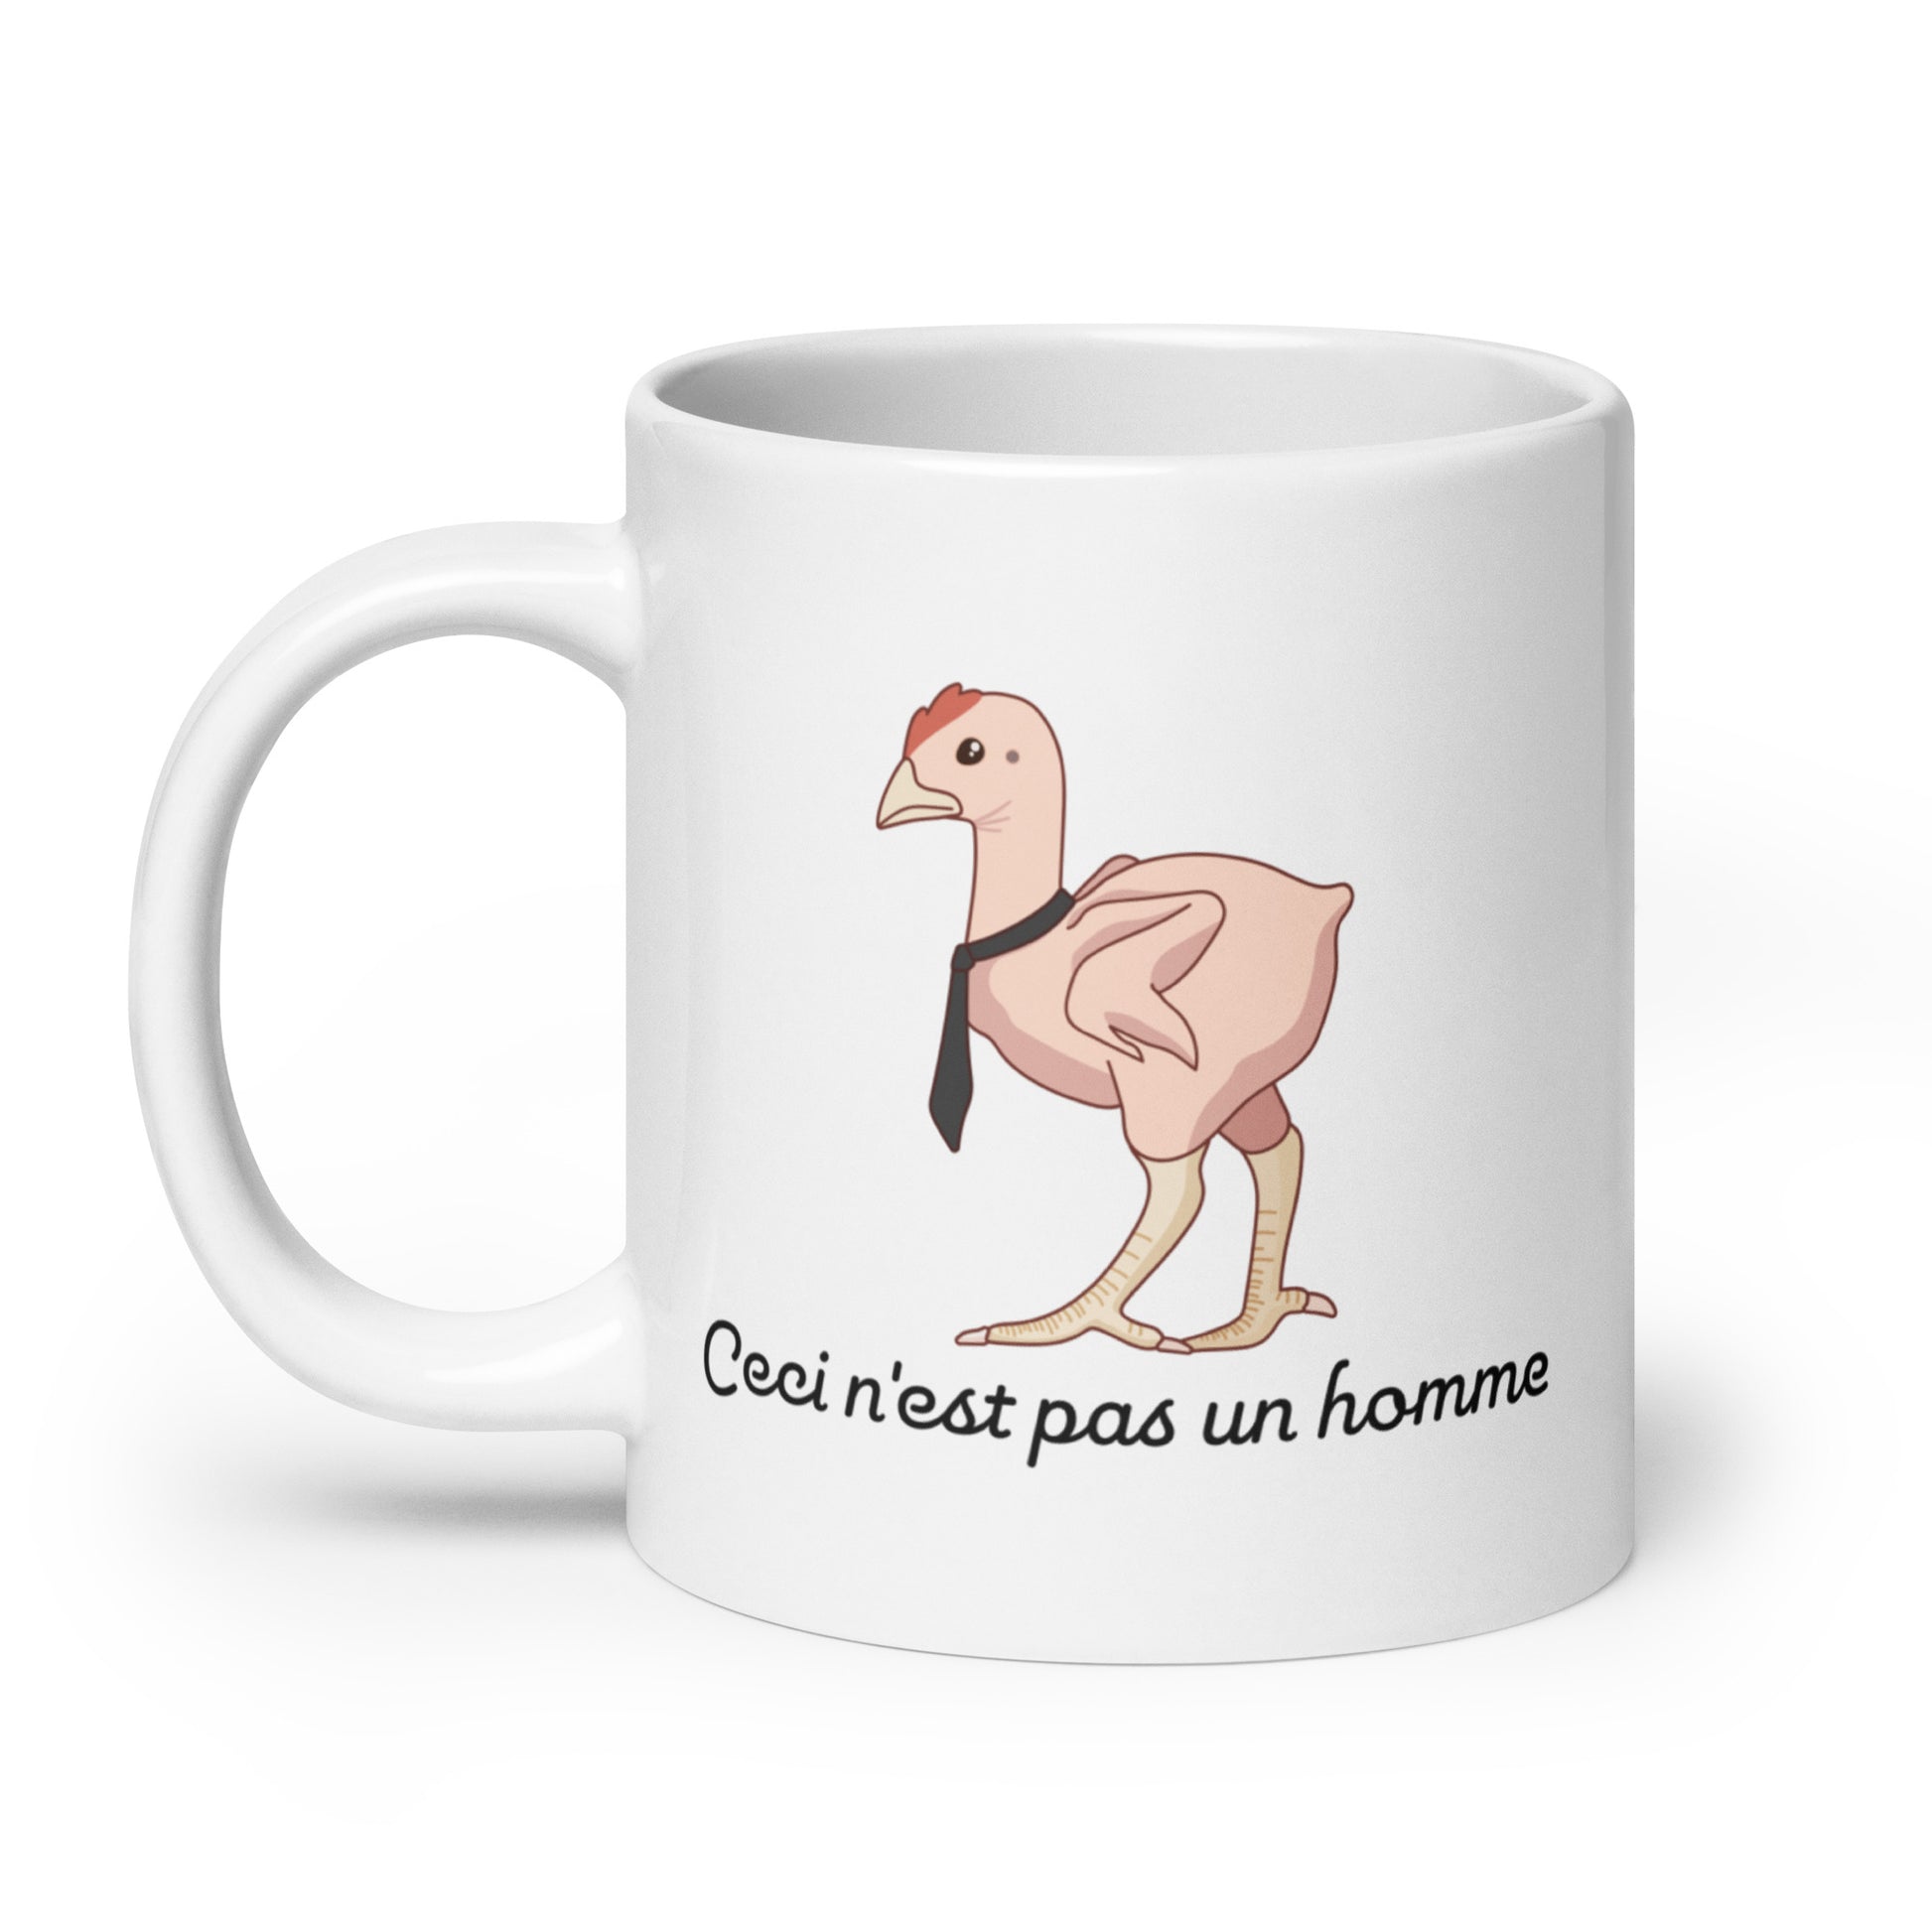 A 20 ounce ceramic mug featuring an illustration of a featherless chicken wearing a tie. Text underneath the chicken reads "Ceci n'est pas un homme" in a cursive font.